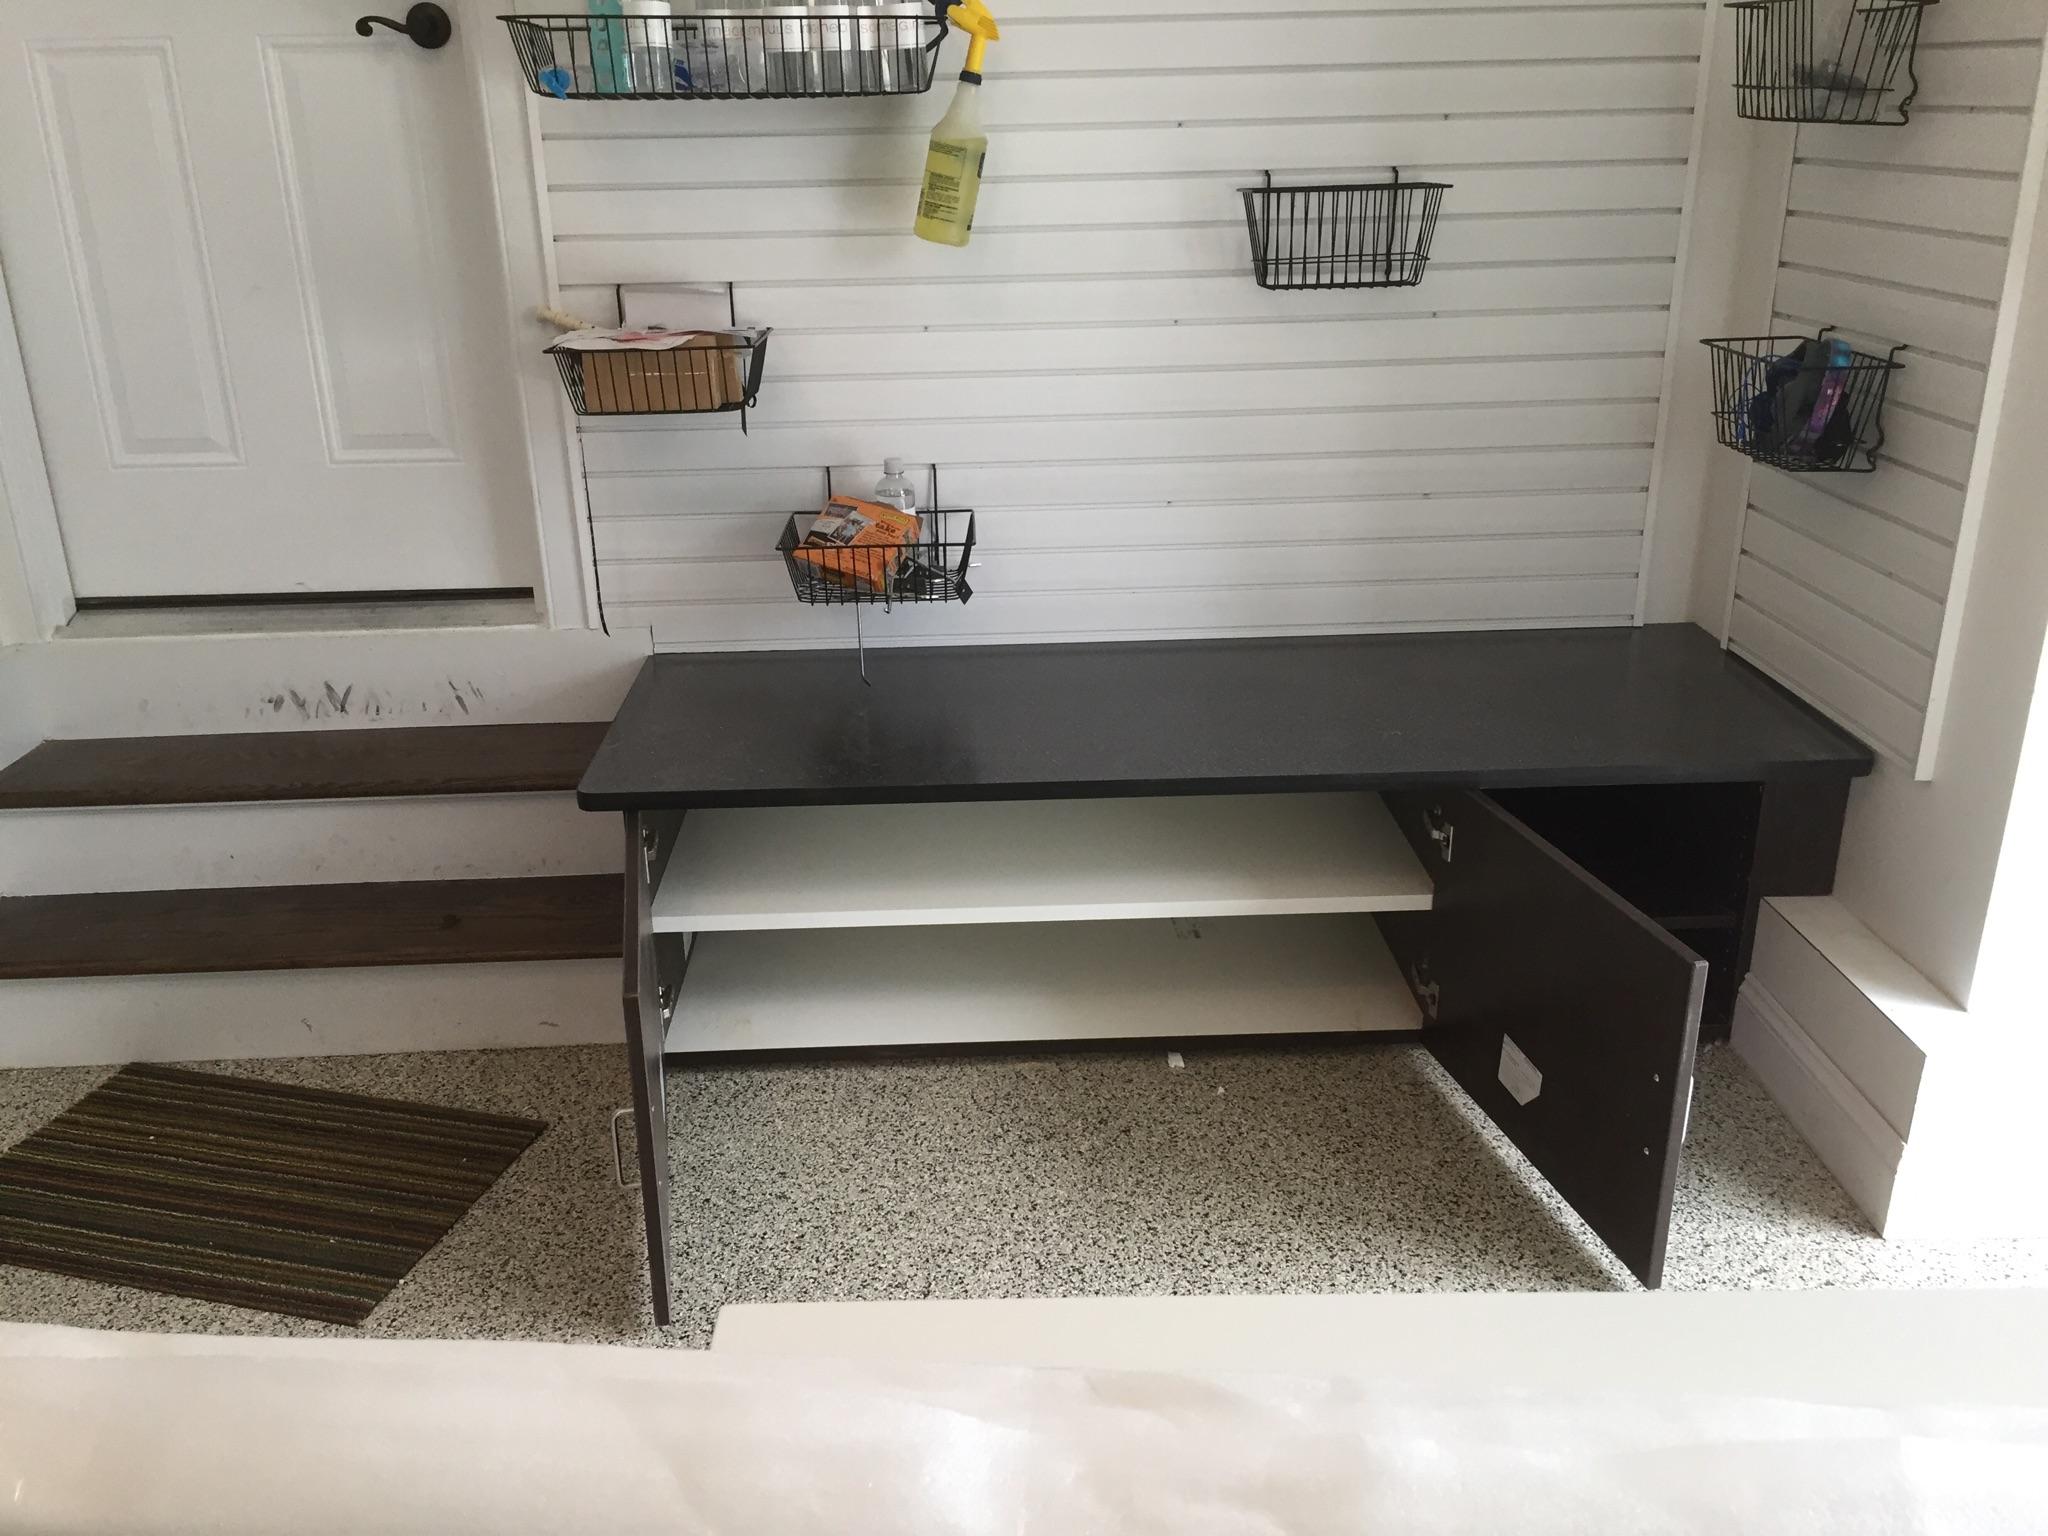 Extended Mud Room - Storage Bench and Slat Wall